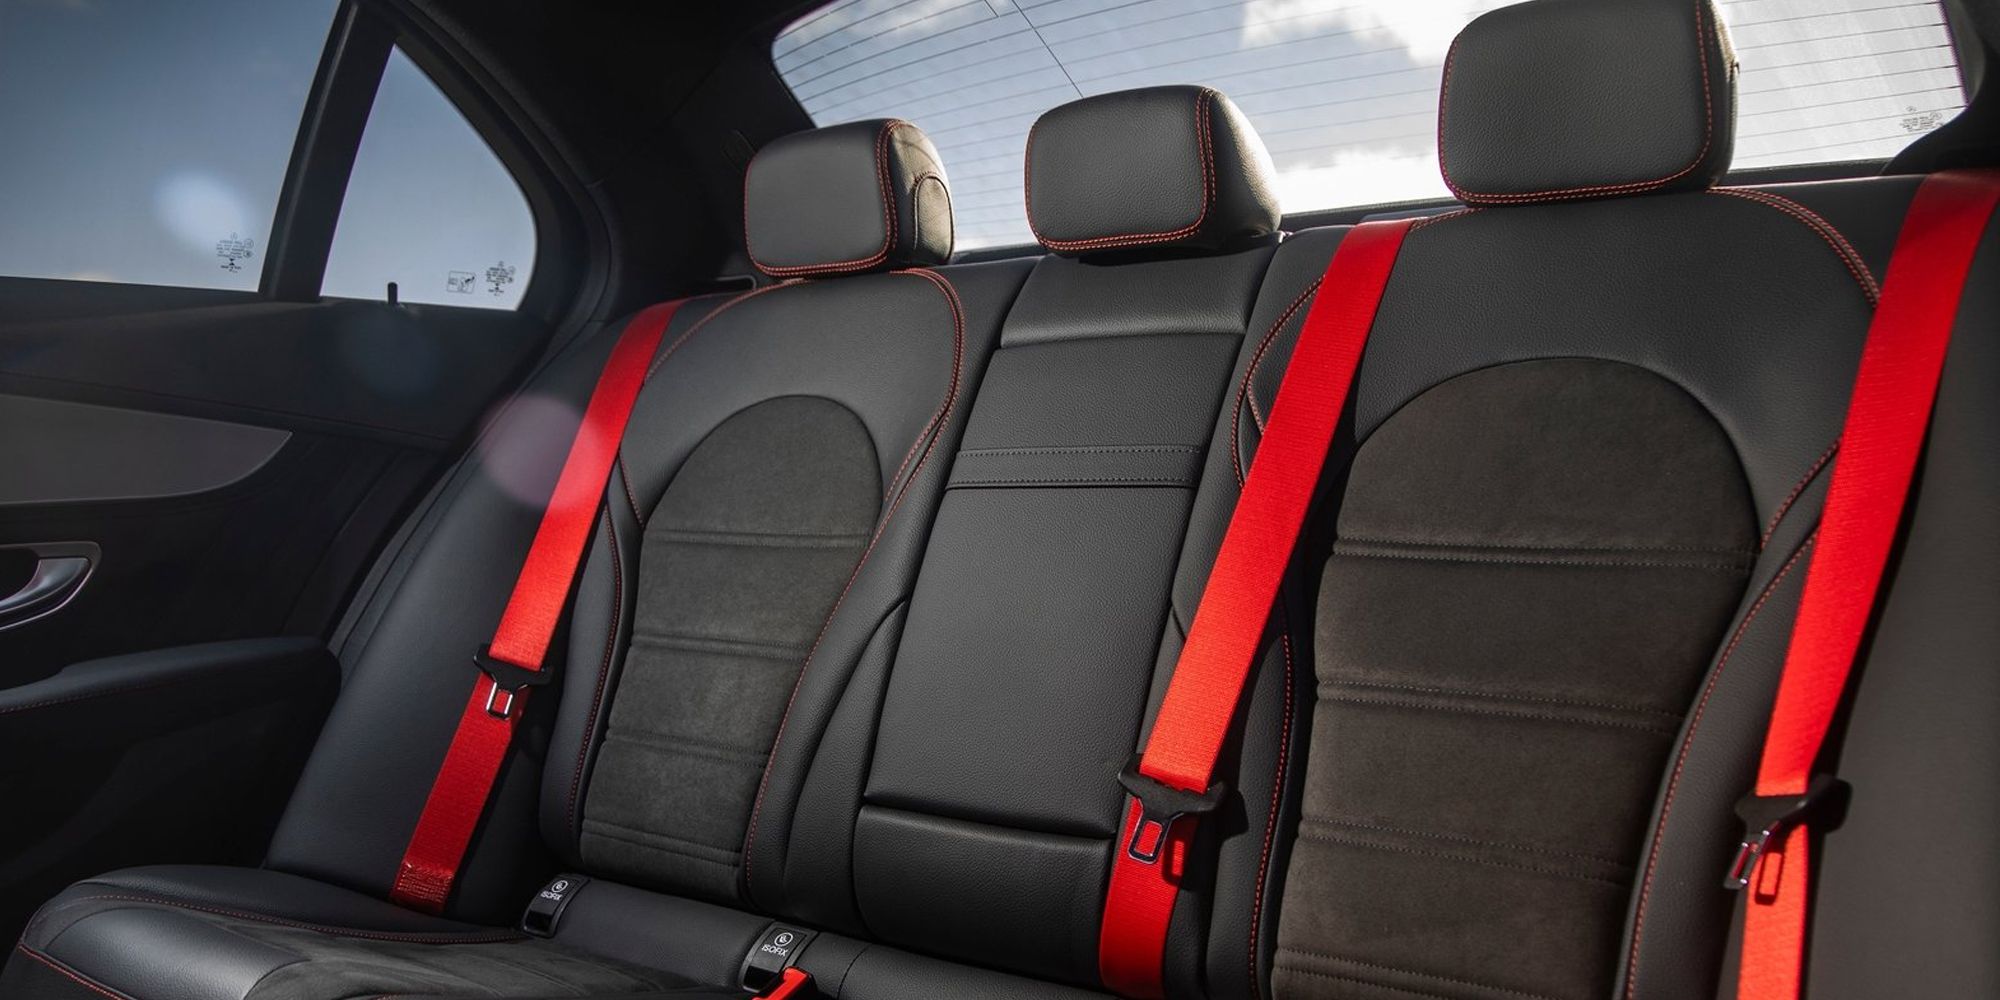 The rear seats in the C43 AMG